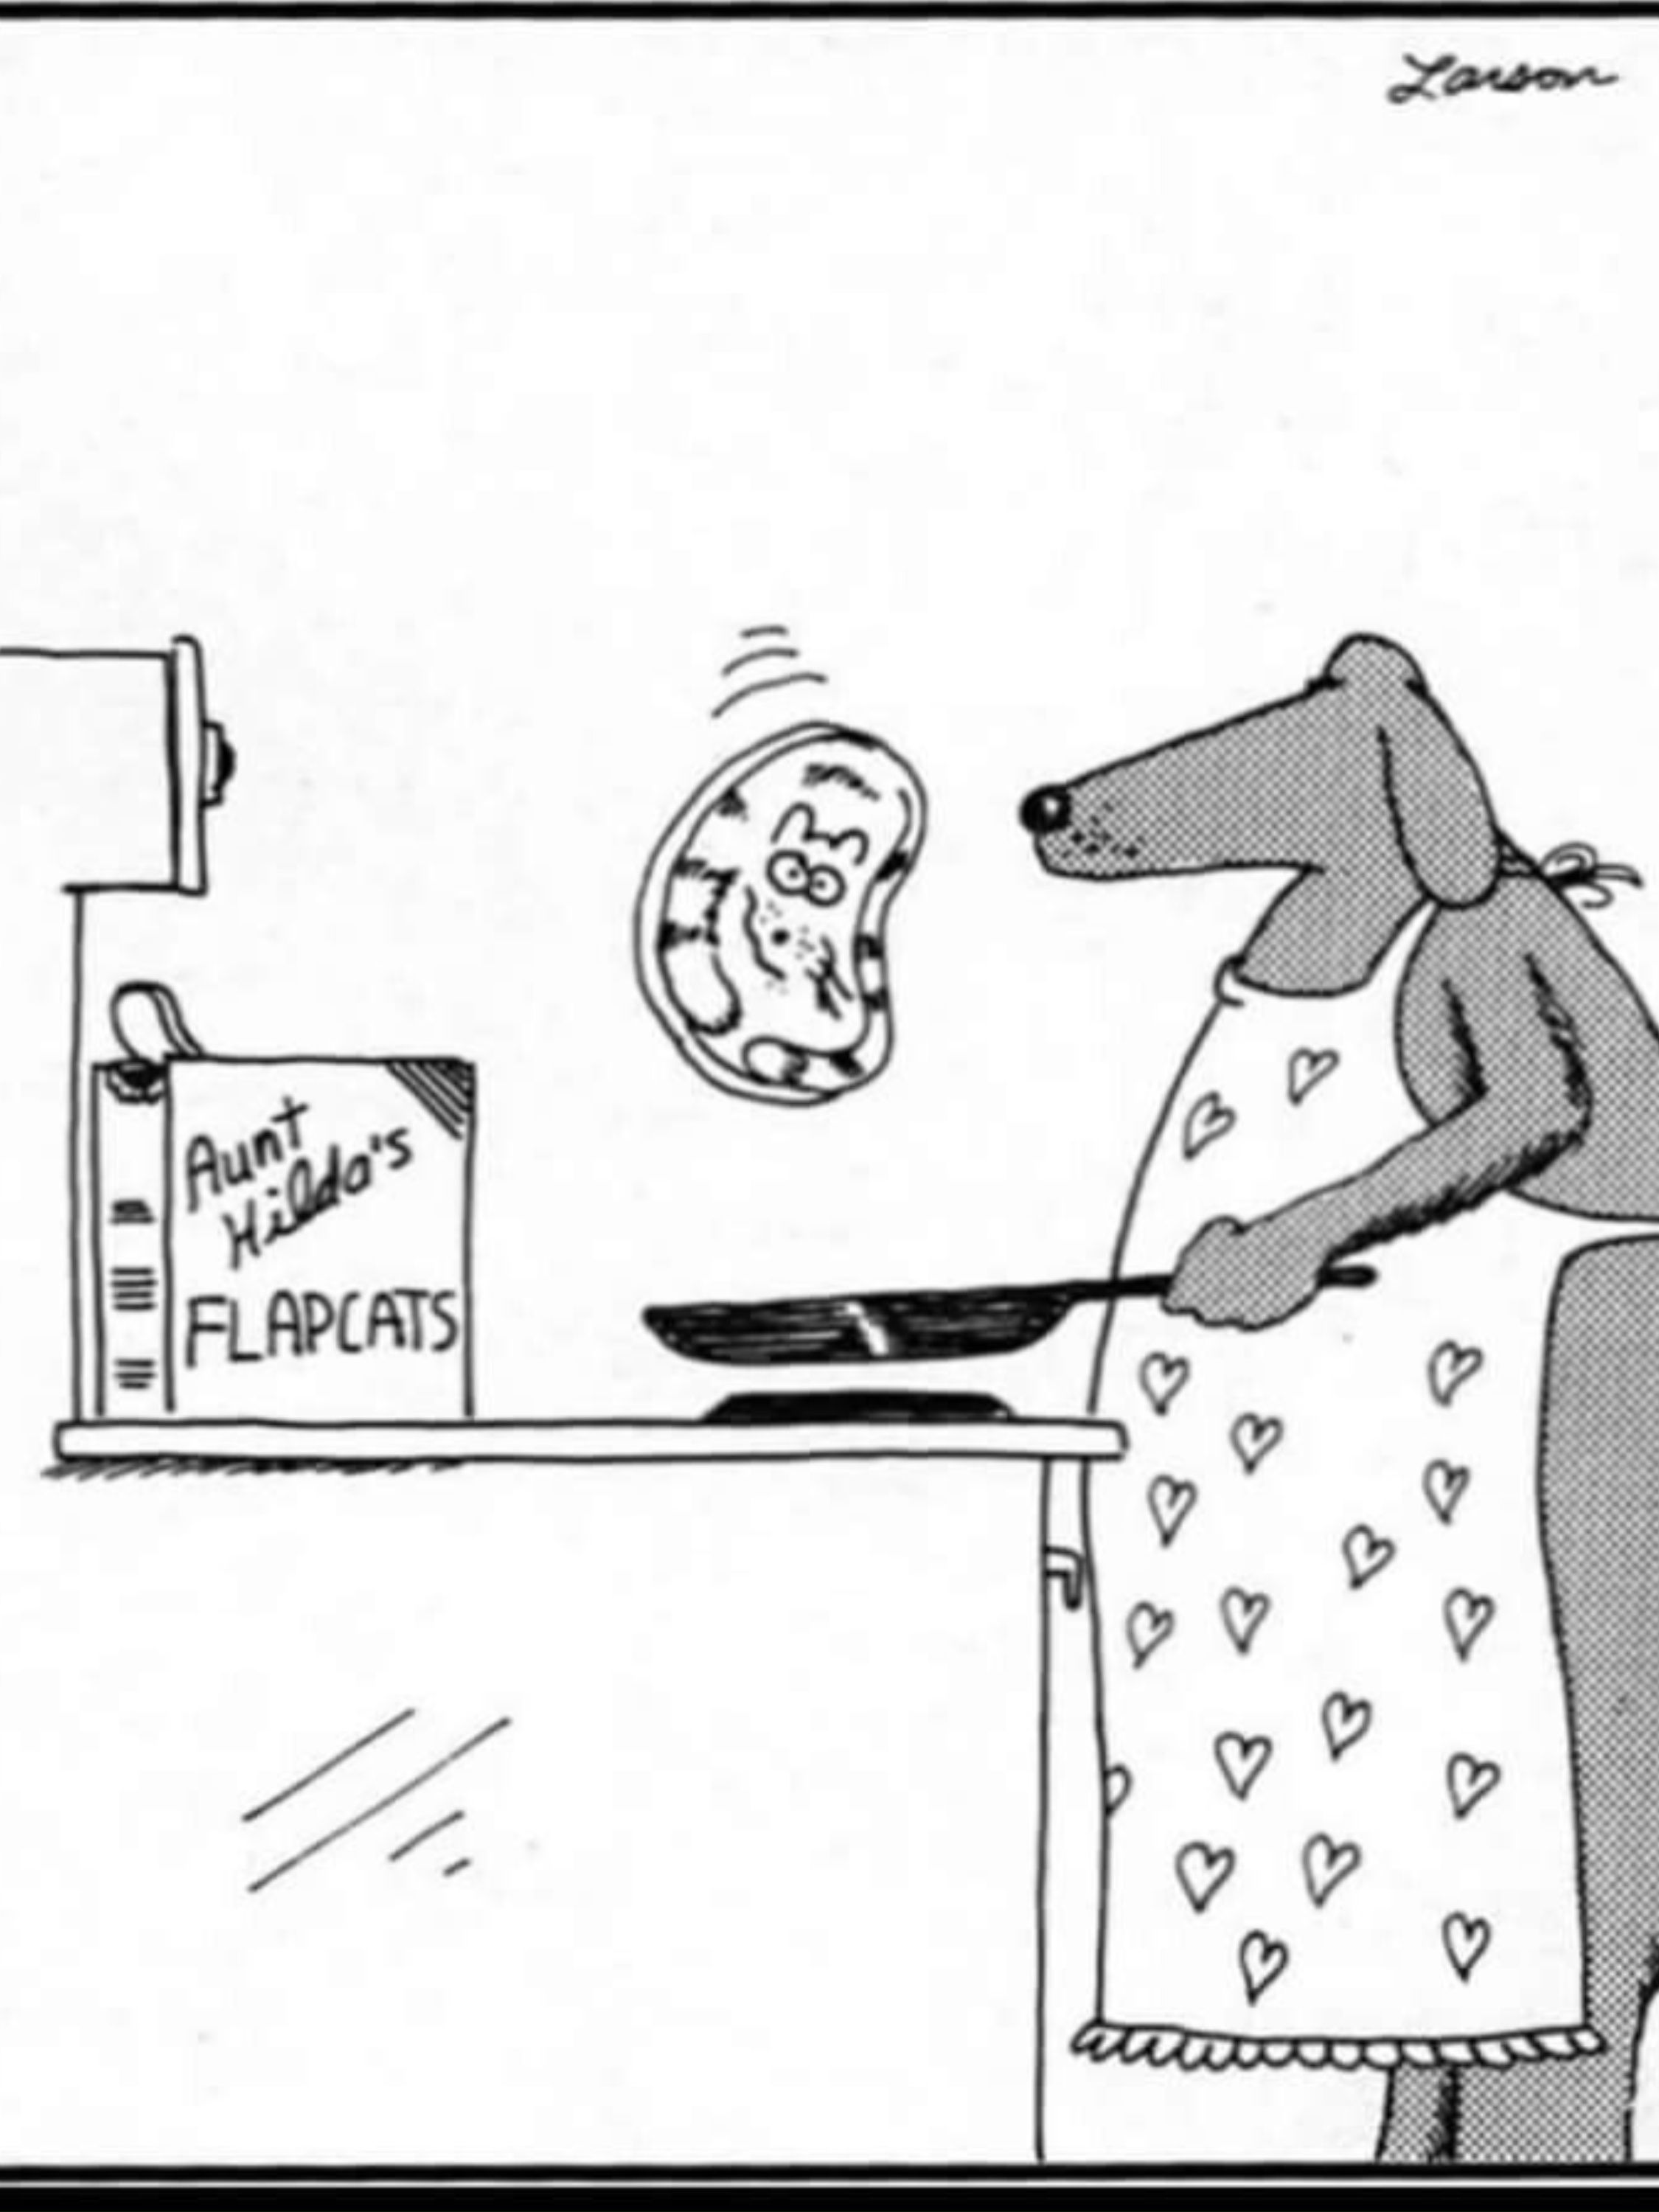 Far Side: A dog flipping a cat in the shape of a pancake in The Far Side.